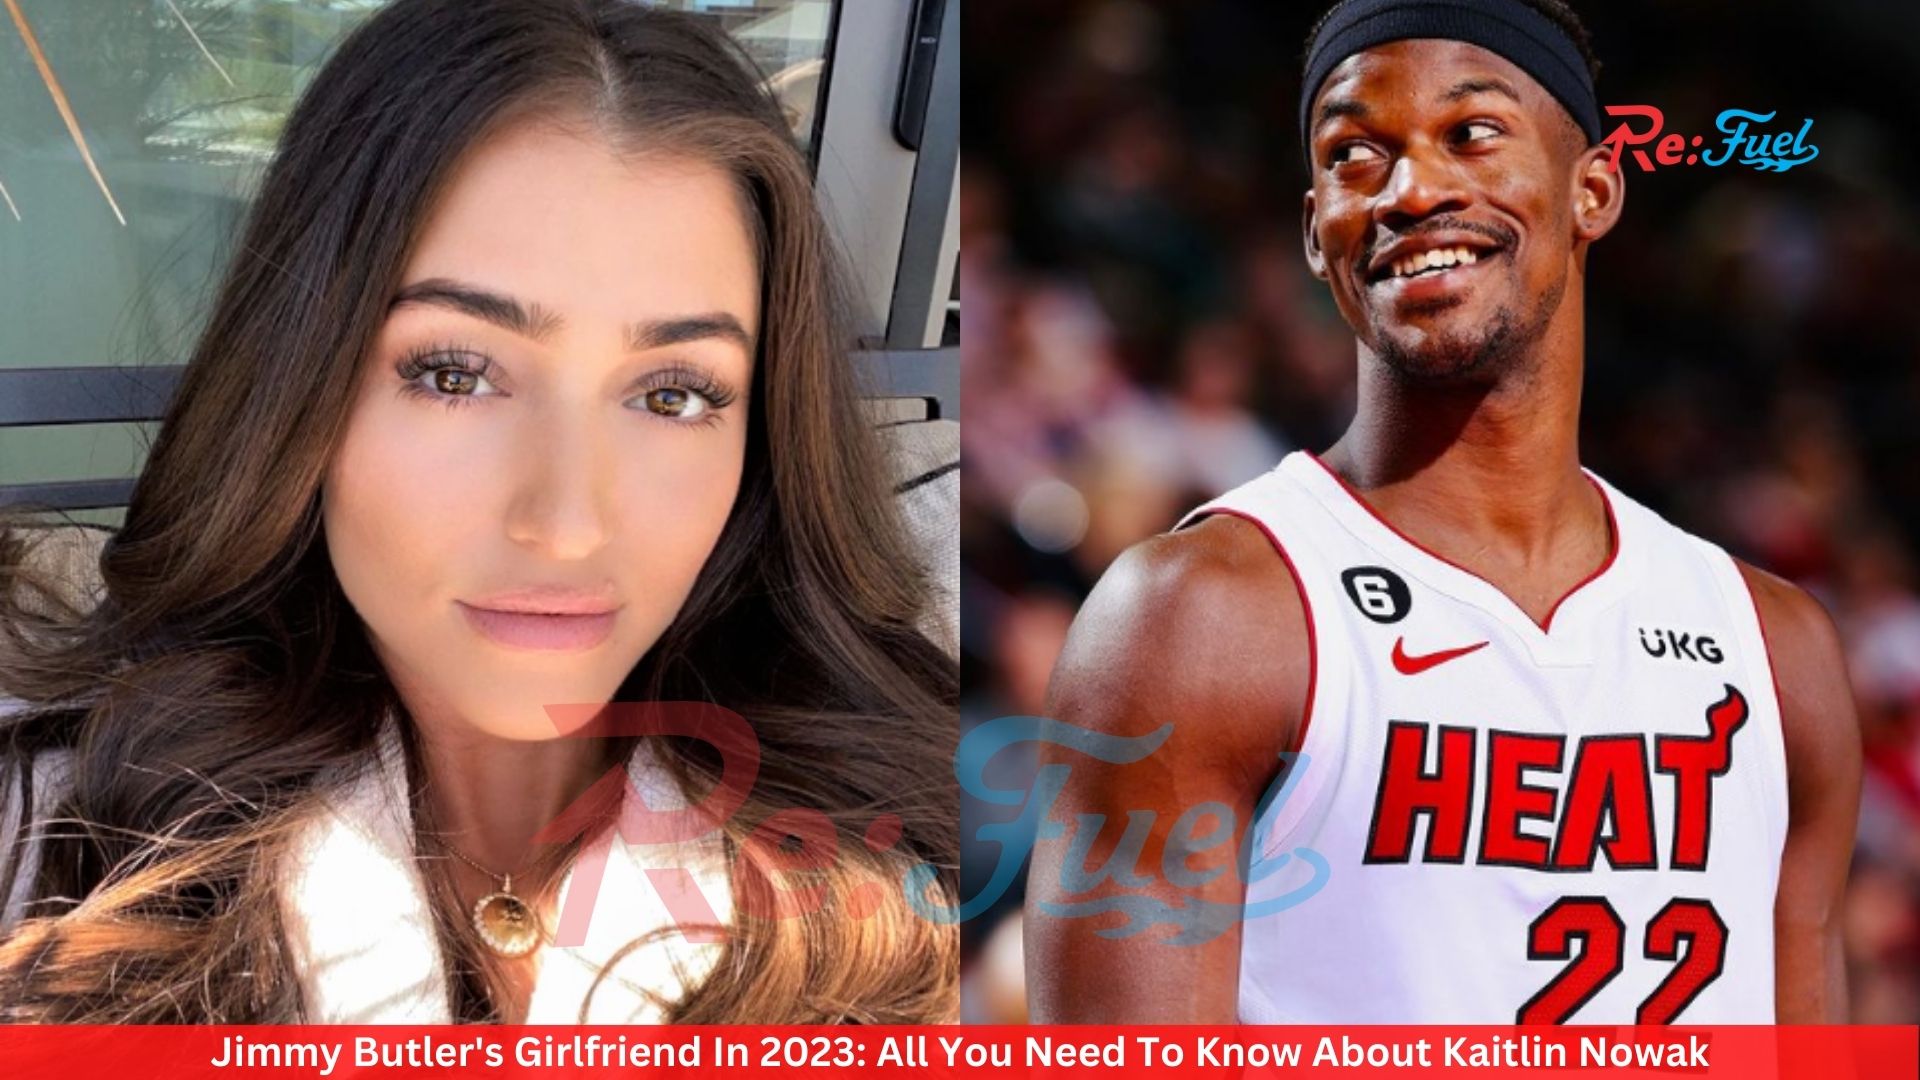 Jimmy Butler's Girlfriend In 2023: All You Need To Know About Kaitlin Nowak